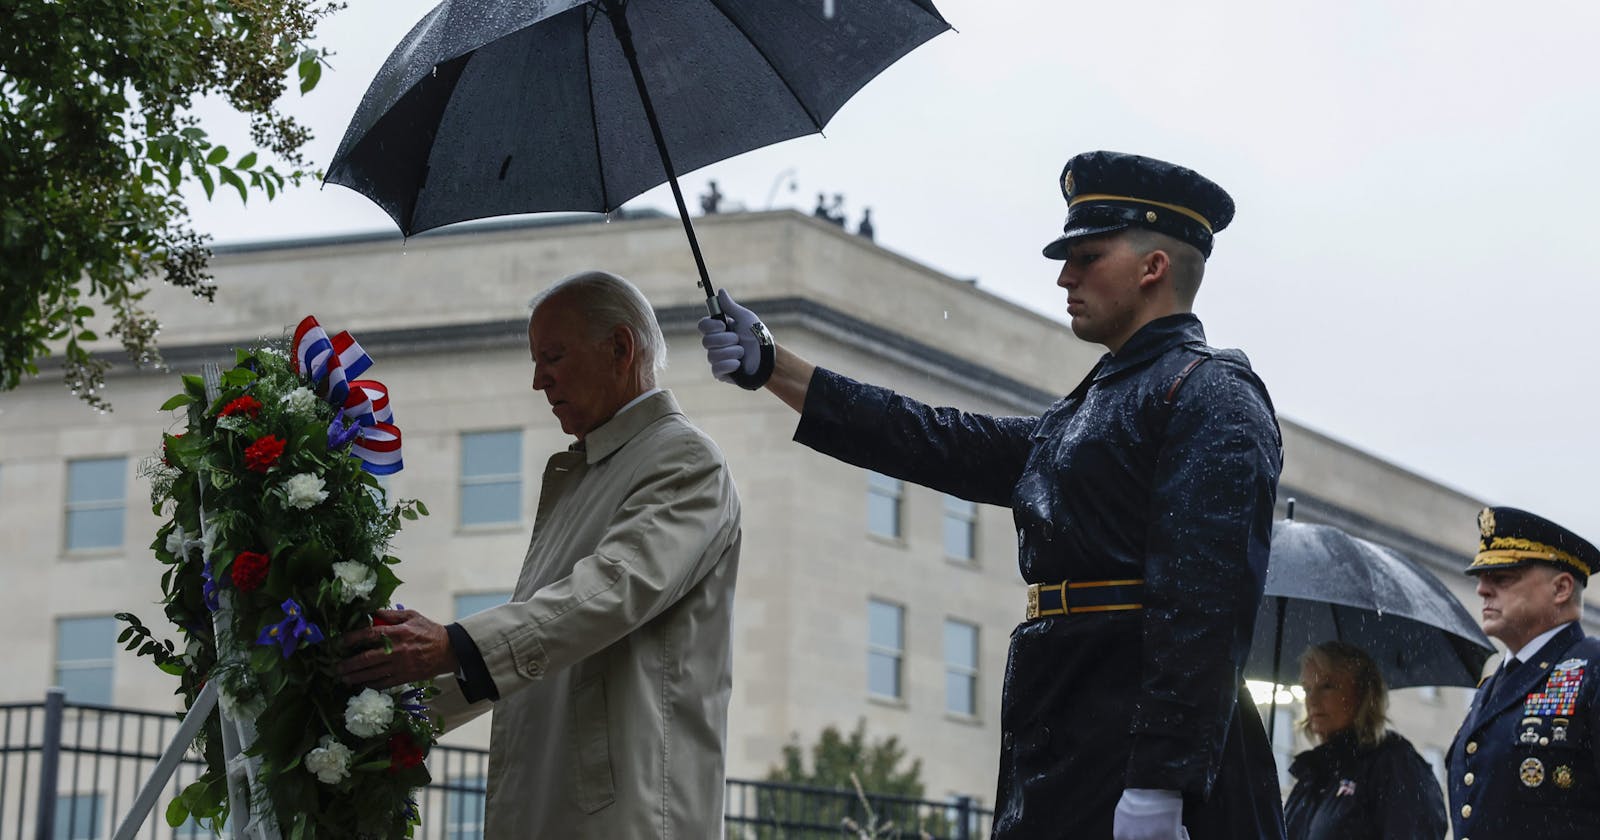 Joe Biden paid tribute to the family of the victims of the 9/11 tragedy